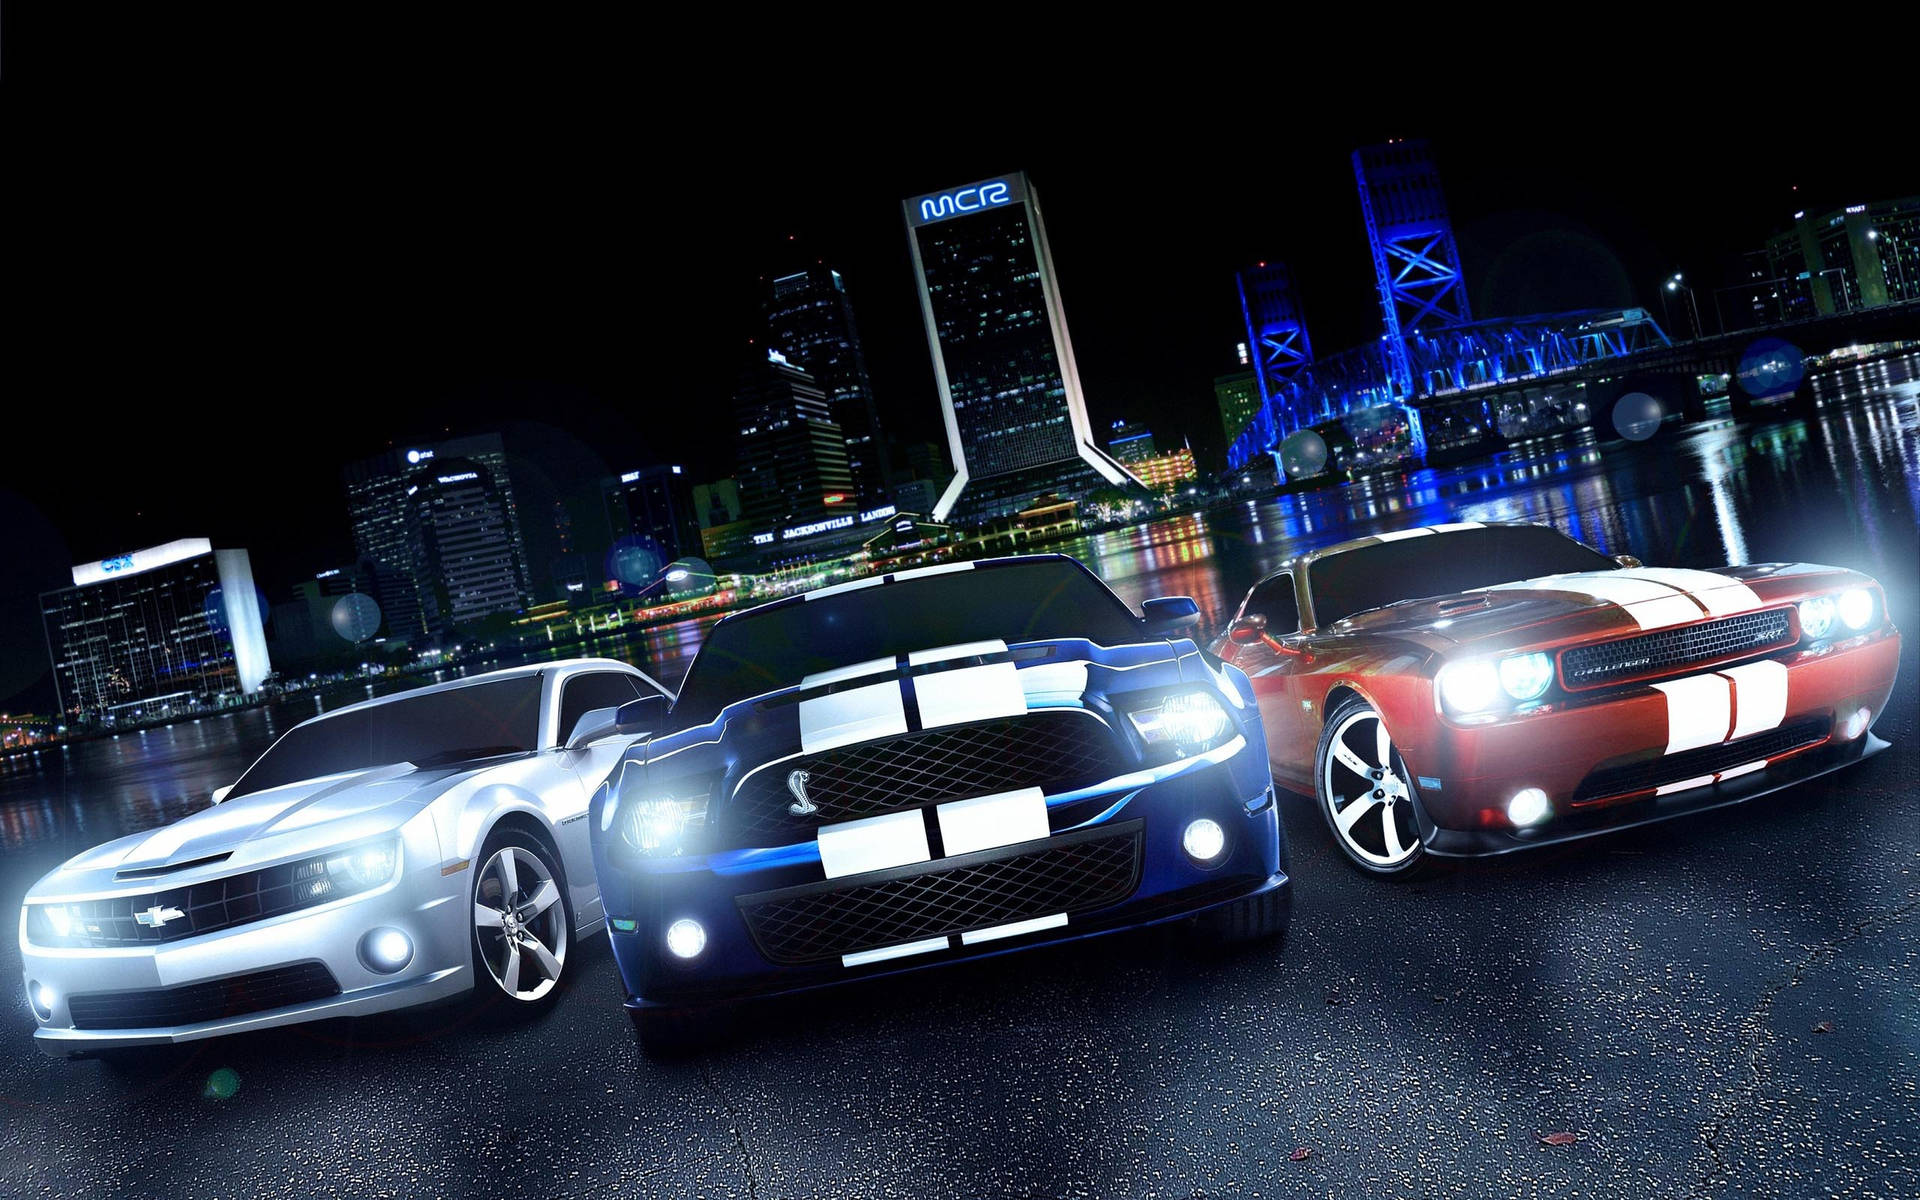 Cool Cars In The City Wallpaper